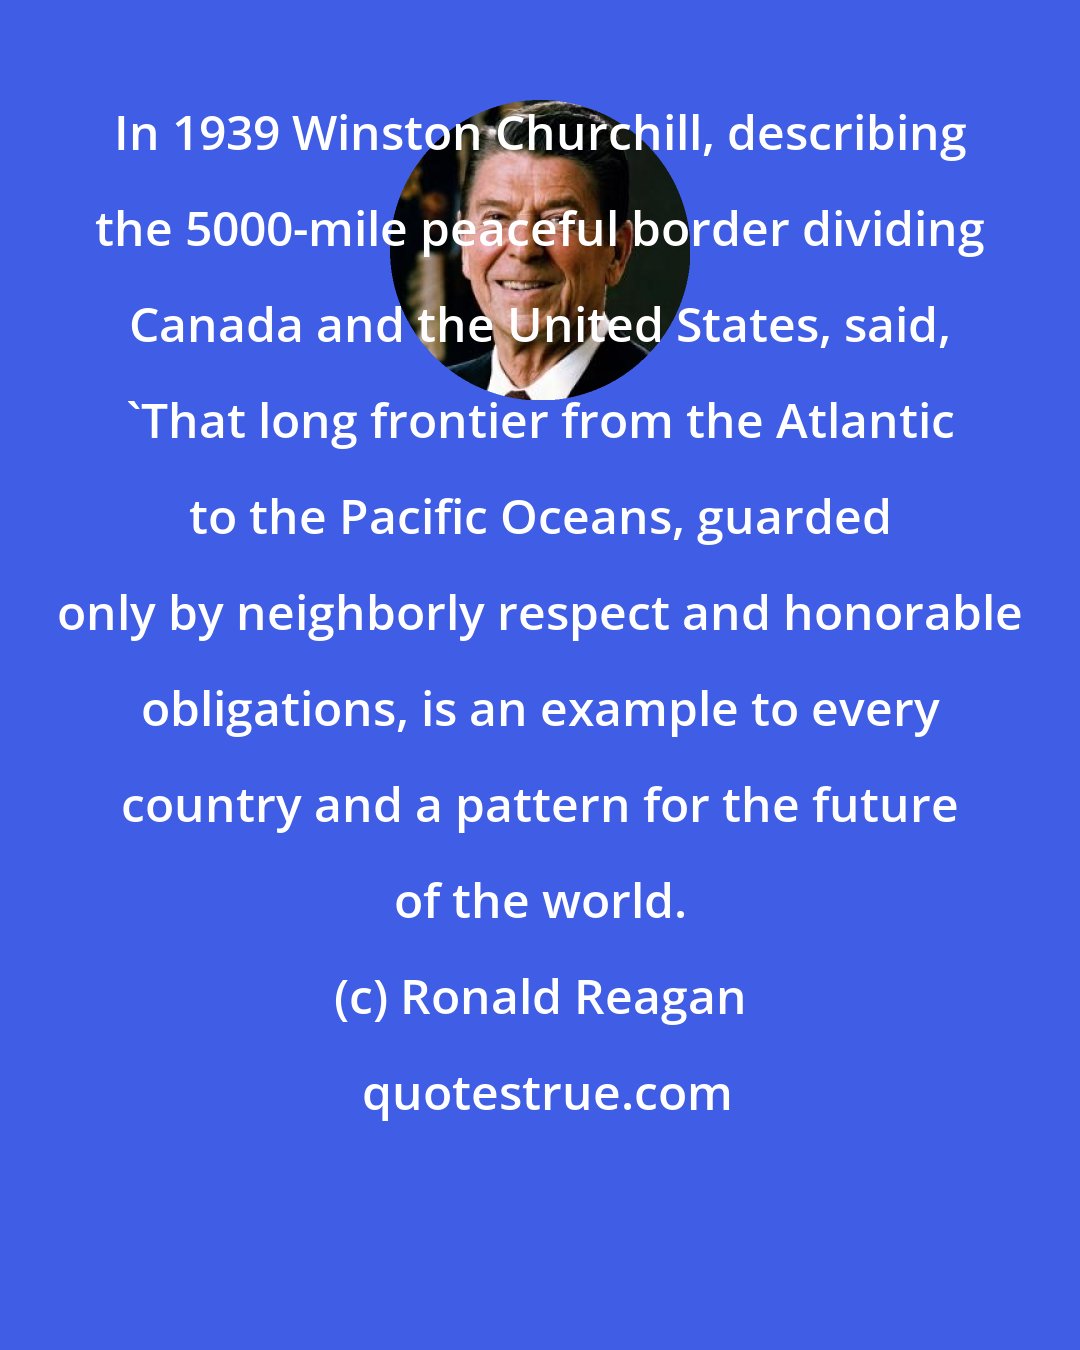 Ronald Reagan: In 1939 Winston Churchill, describing the 5000-mile peaceful border dividing Canada and the United States, said, 'That long frontier from the Atlantic to the Pacific Oceans, guarded only by neighborly respect and honorable obligations, is an example to every country and a pattern for the future of the world.